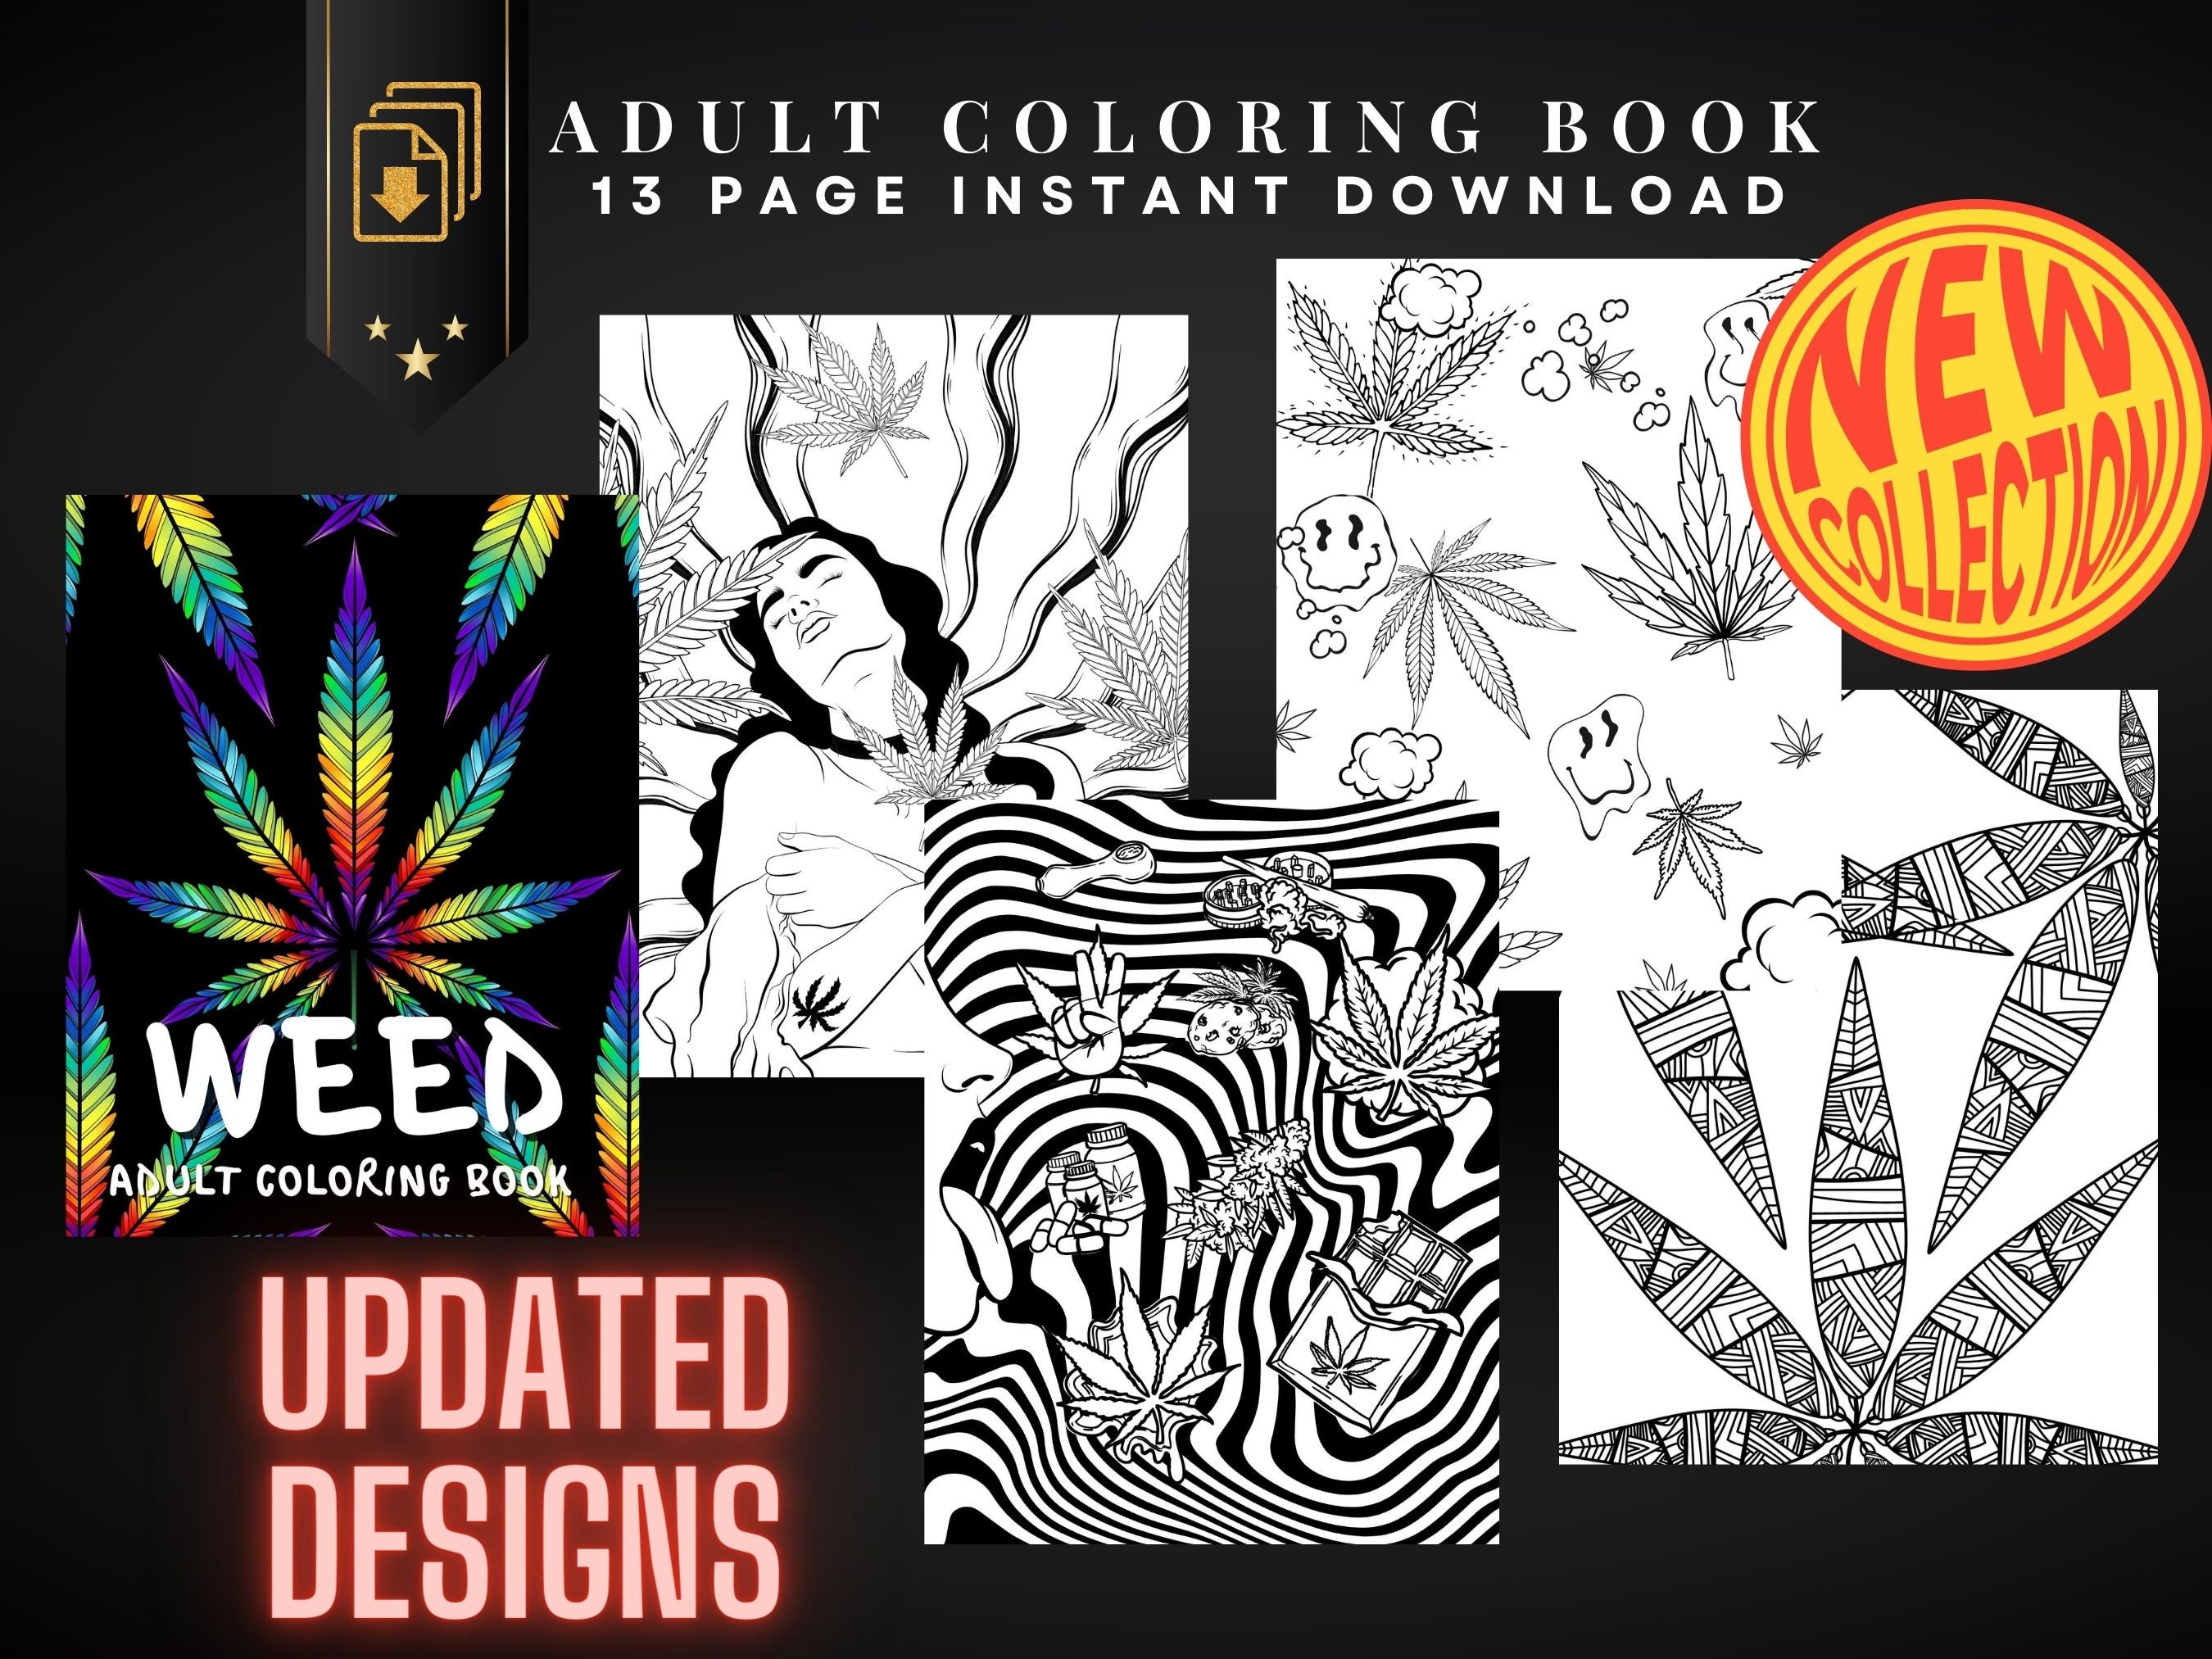 Stoner Coloring Book for Adults: the king of weed Let's Get High And Color,  The Stoner's Psychedelic Coloring Book, cannabis coloring books for adults  (Paperback)